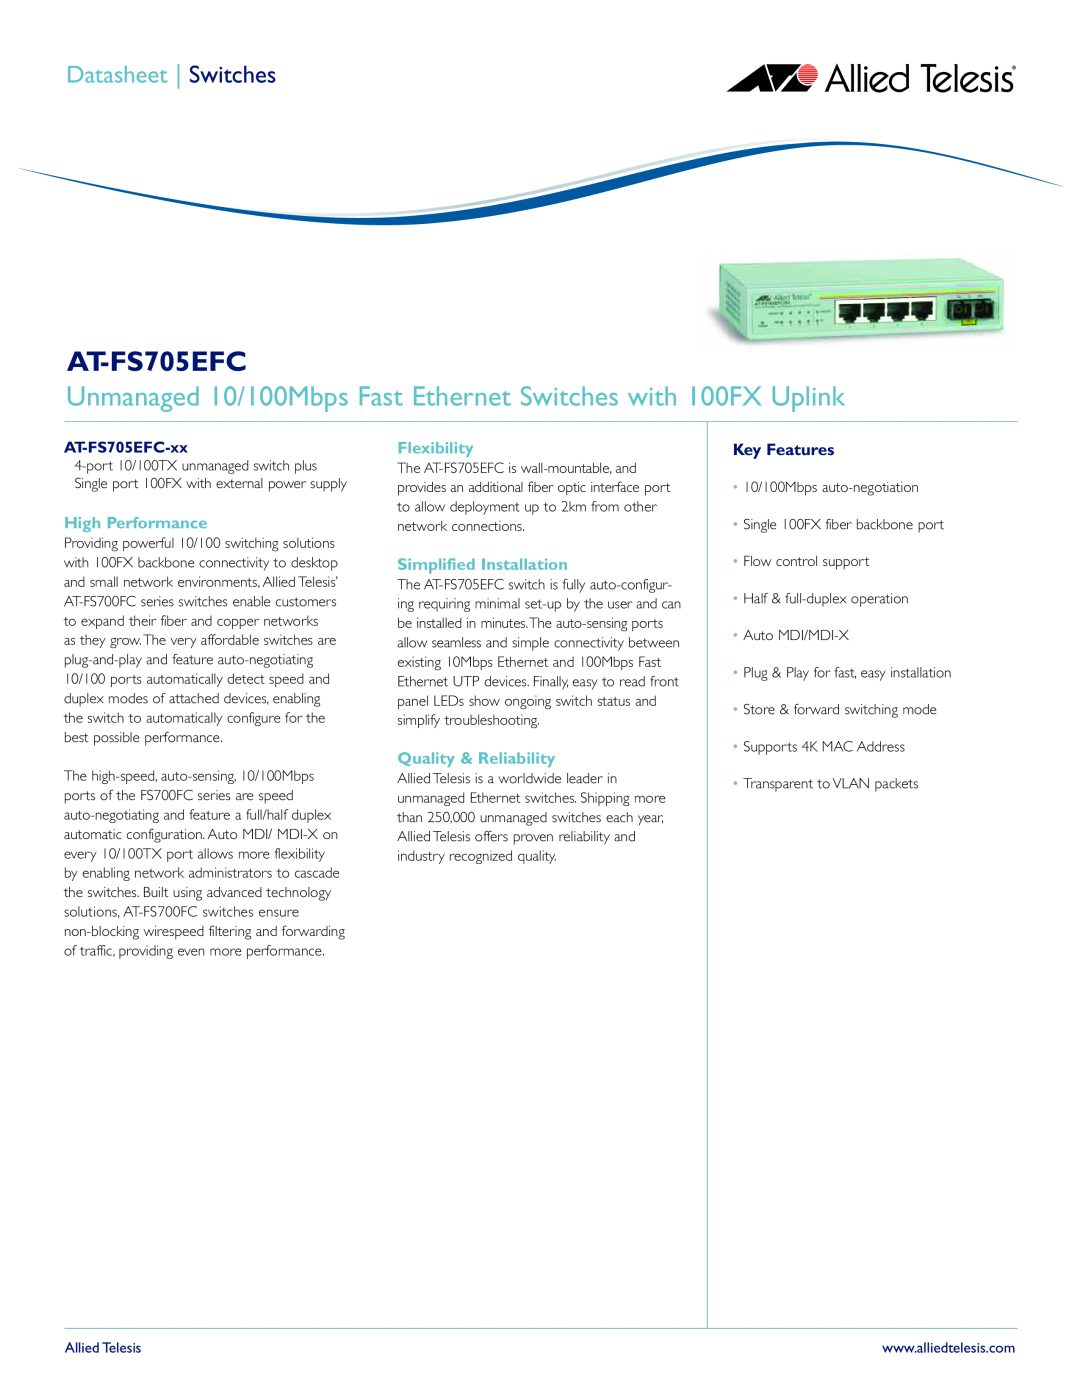 Allied Telesis at-fs705efc manual Datasheet Switches, High Performance, Flexibility, Simplified Installation, Key Features 